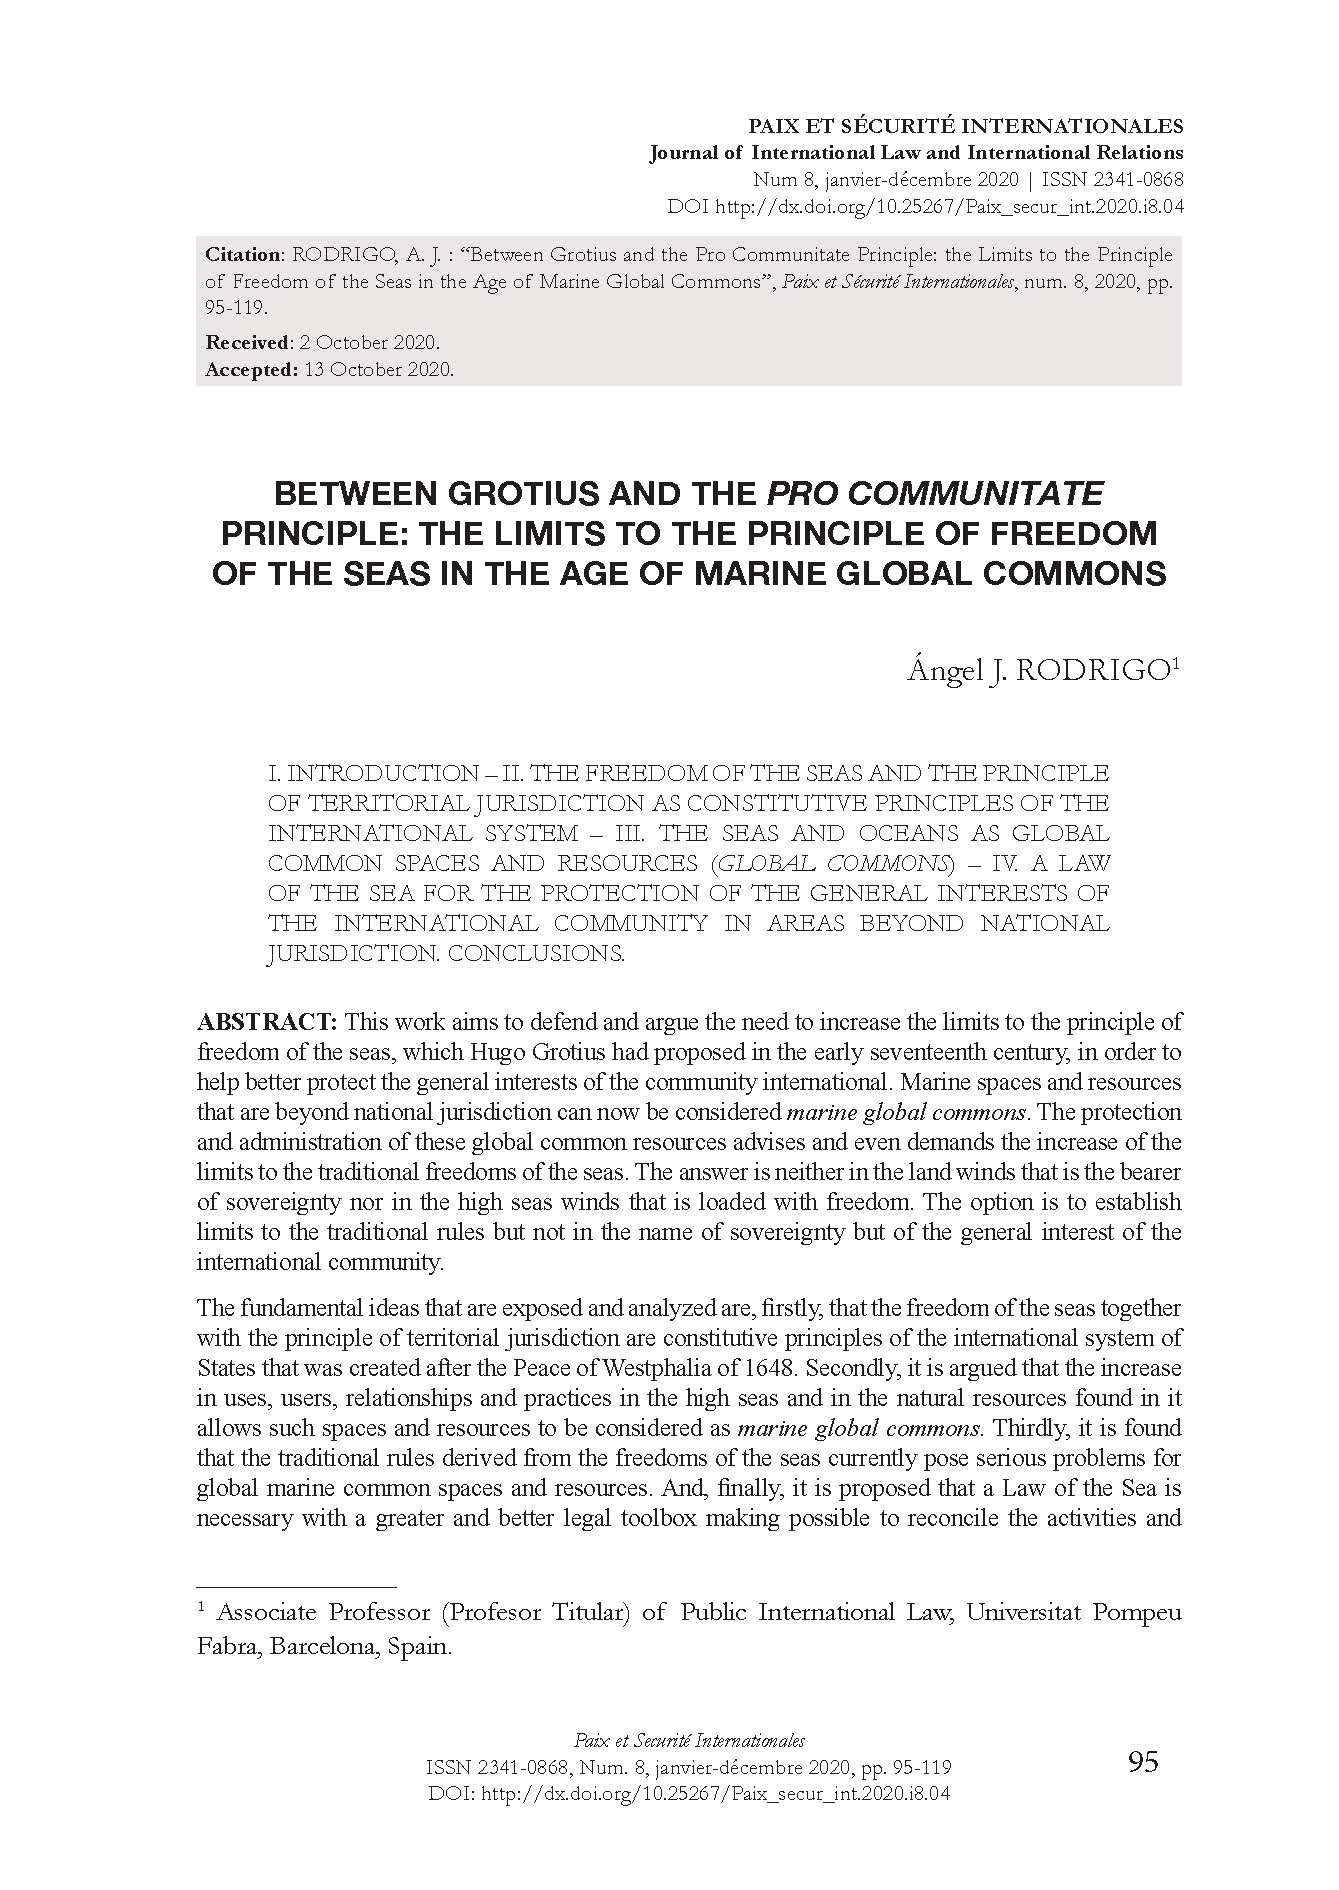 Between Grotius and the pro communitate Principle: The Limits to the Principle of Freedom of the Seas in the Age of Marine Global Commons